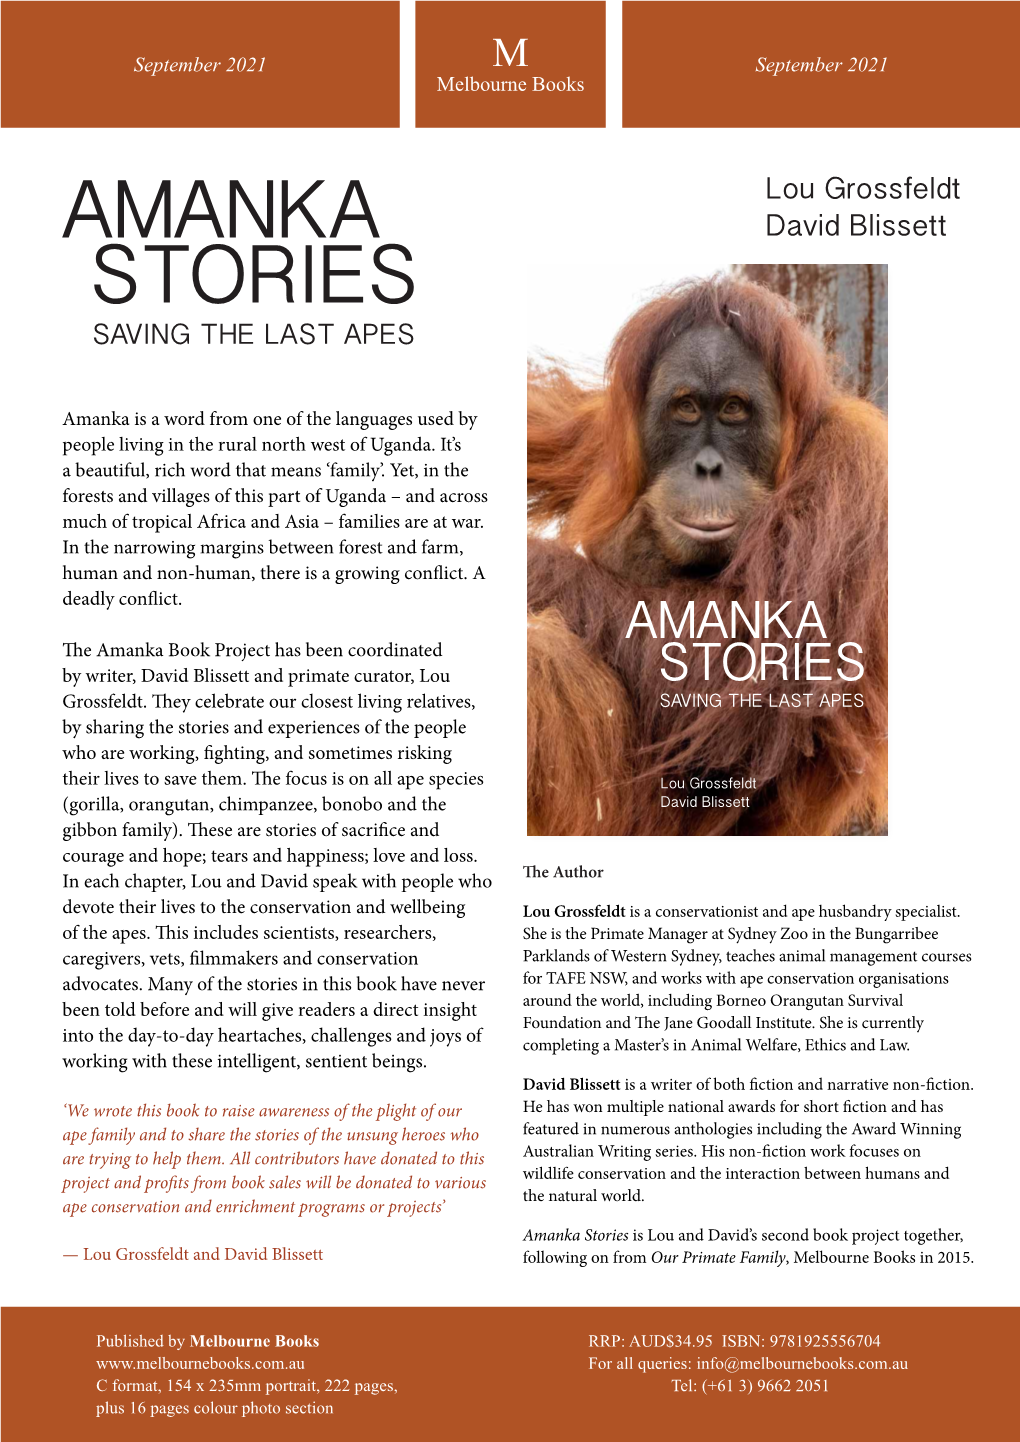 Amanka Stories Is Lou and David’S Second Book Project Together, — Lou Grossfeldt and David Blissett Following on from Our Primate Family, Melbourne Books in 2015